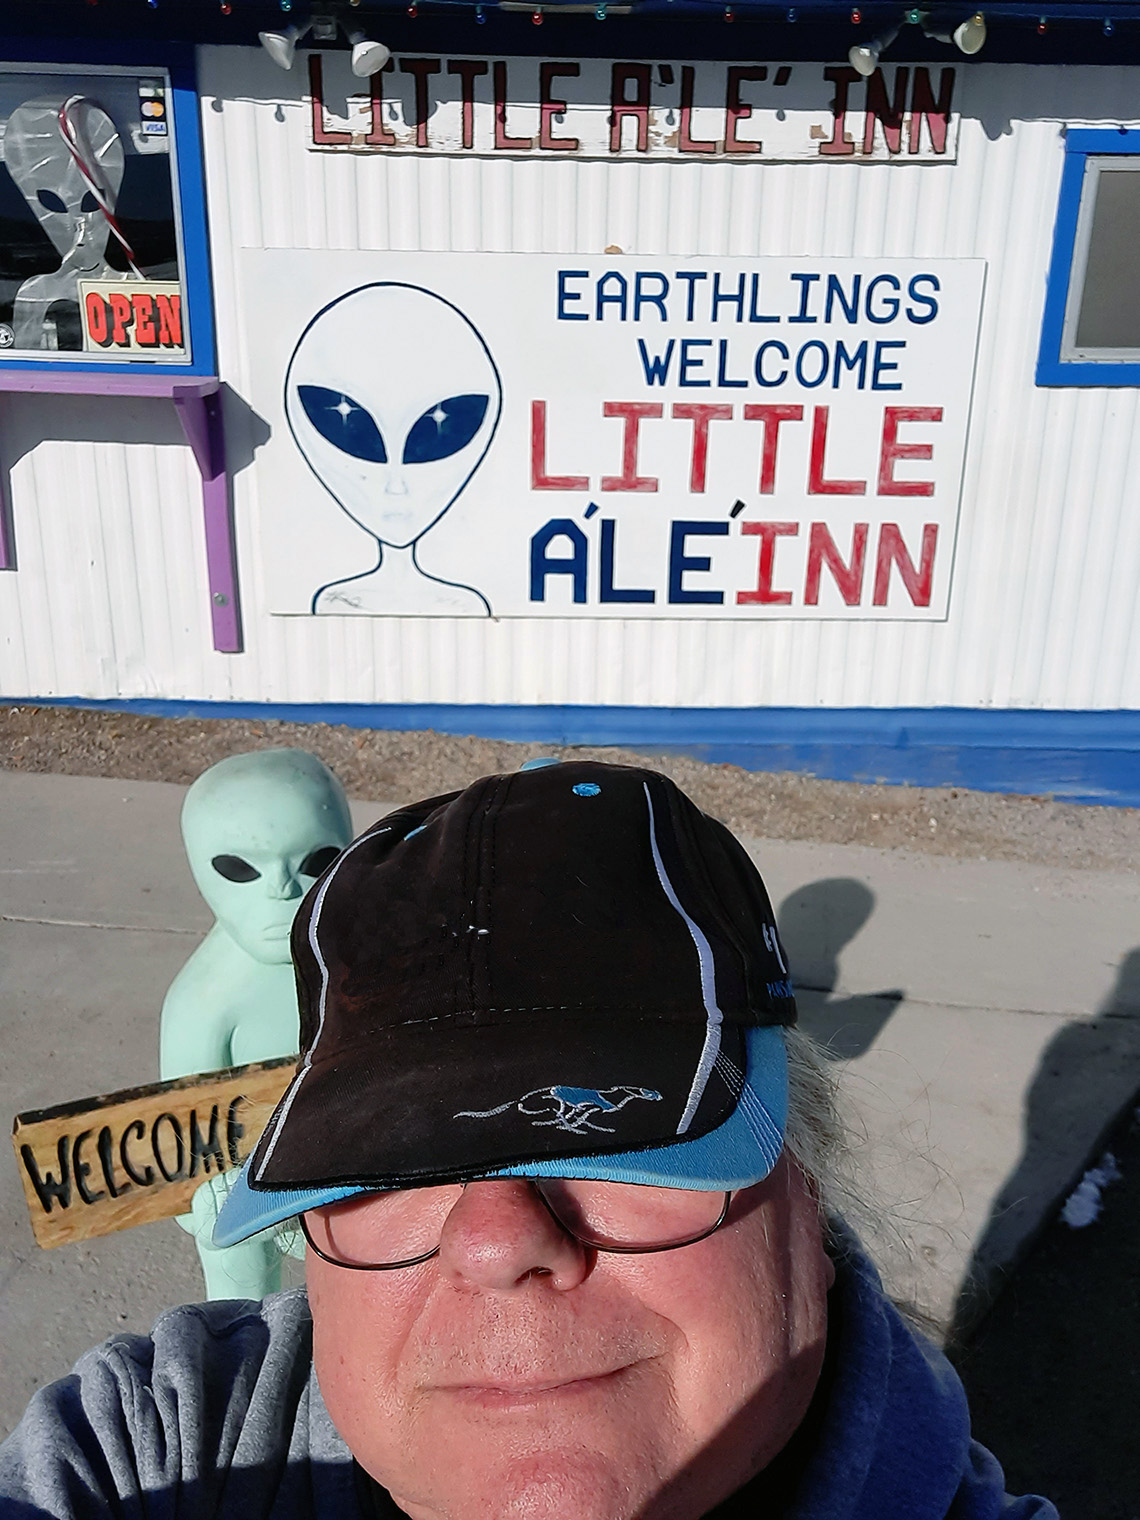 A selfie of CSM art instructor Gary Jameson, wearing a black and blue baseball cap, standing in front of an extraterrestrial-themed inn